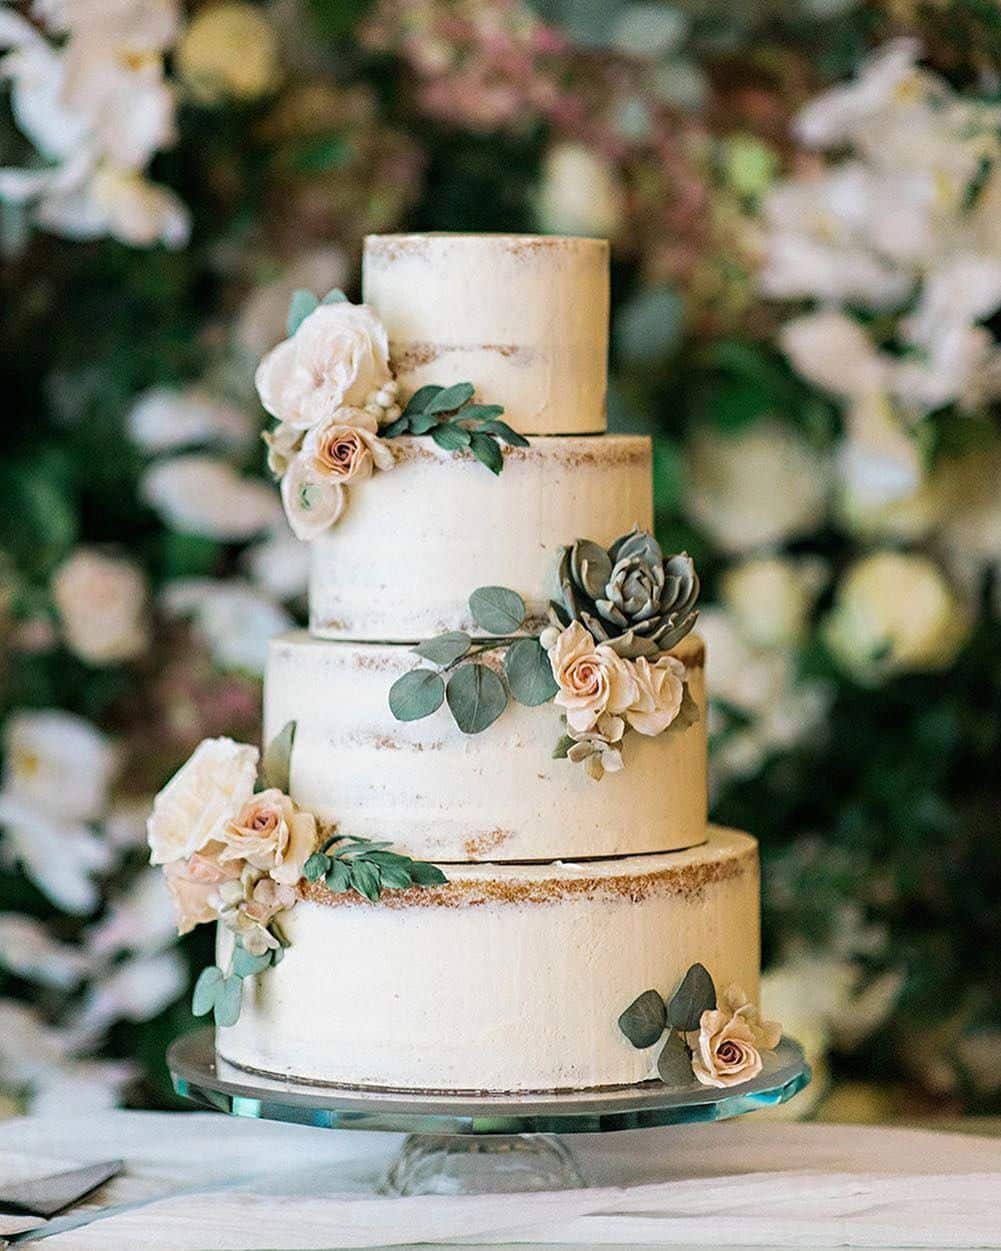 10 Easy Ways to Create a Simple and Elegant Wedding Cake of Your Own ...